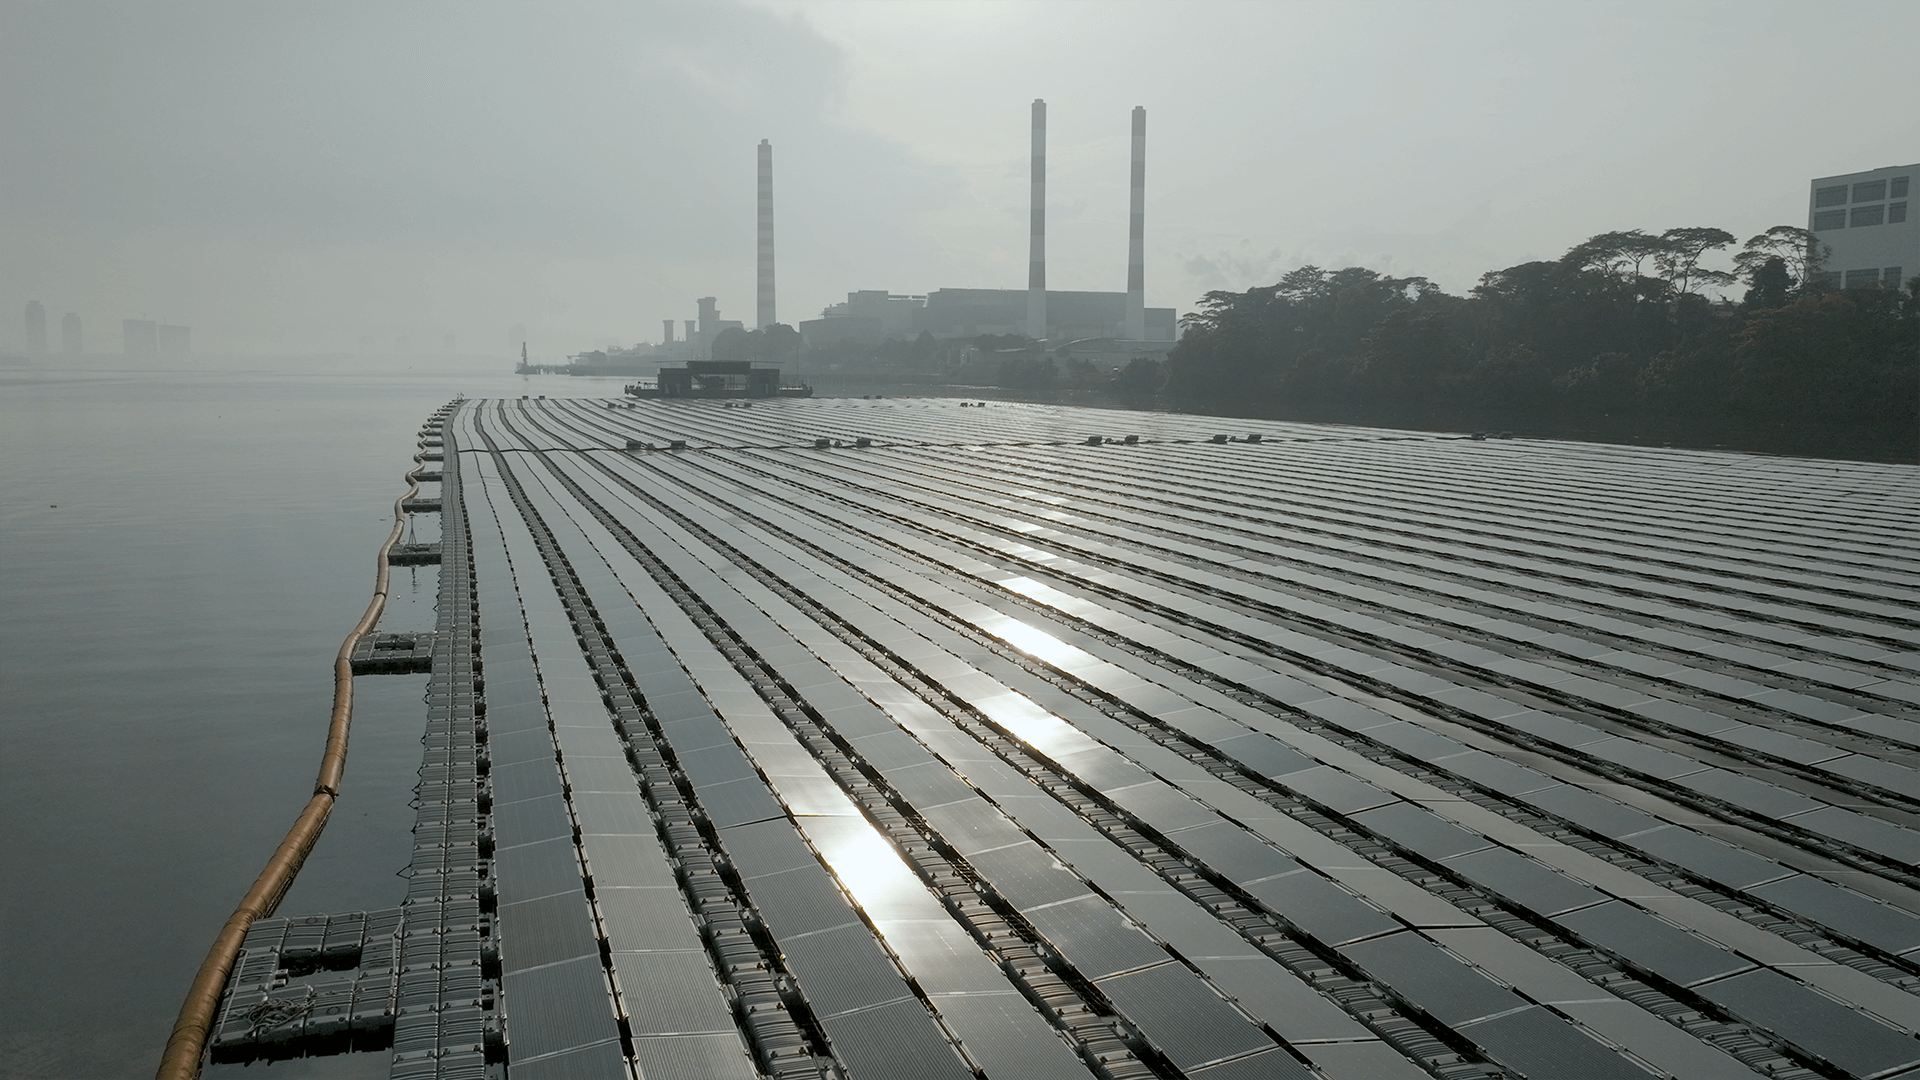 Floating offshore solar: a global solution in the race to net zero